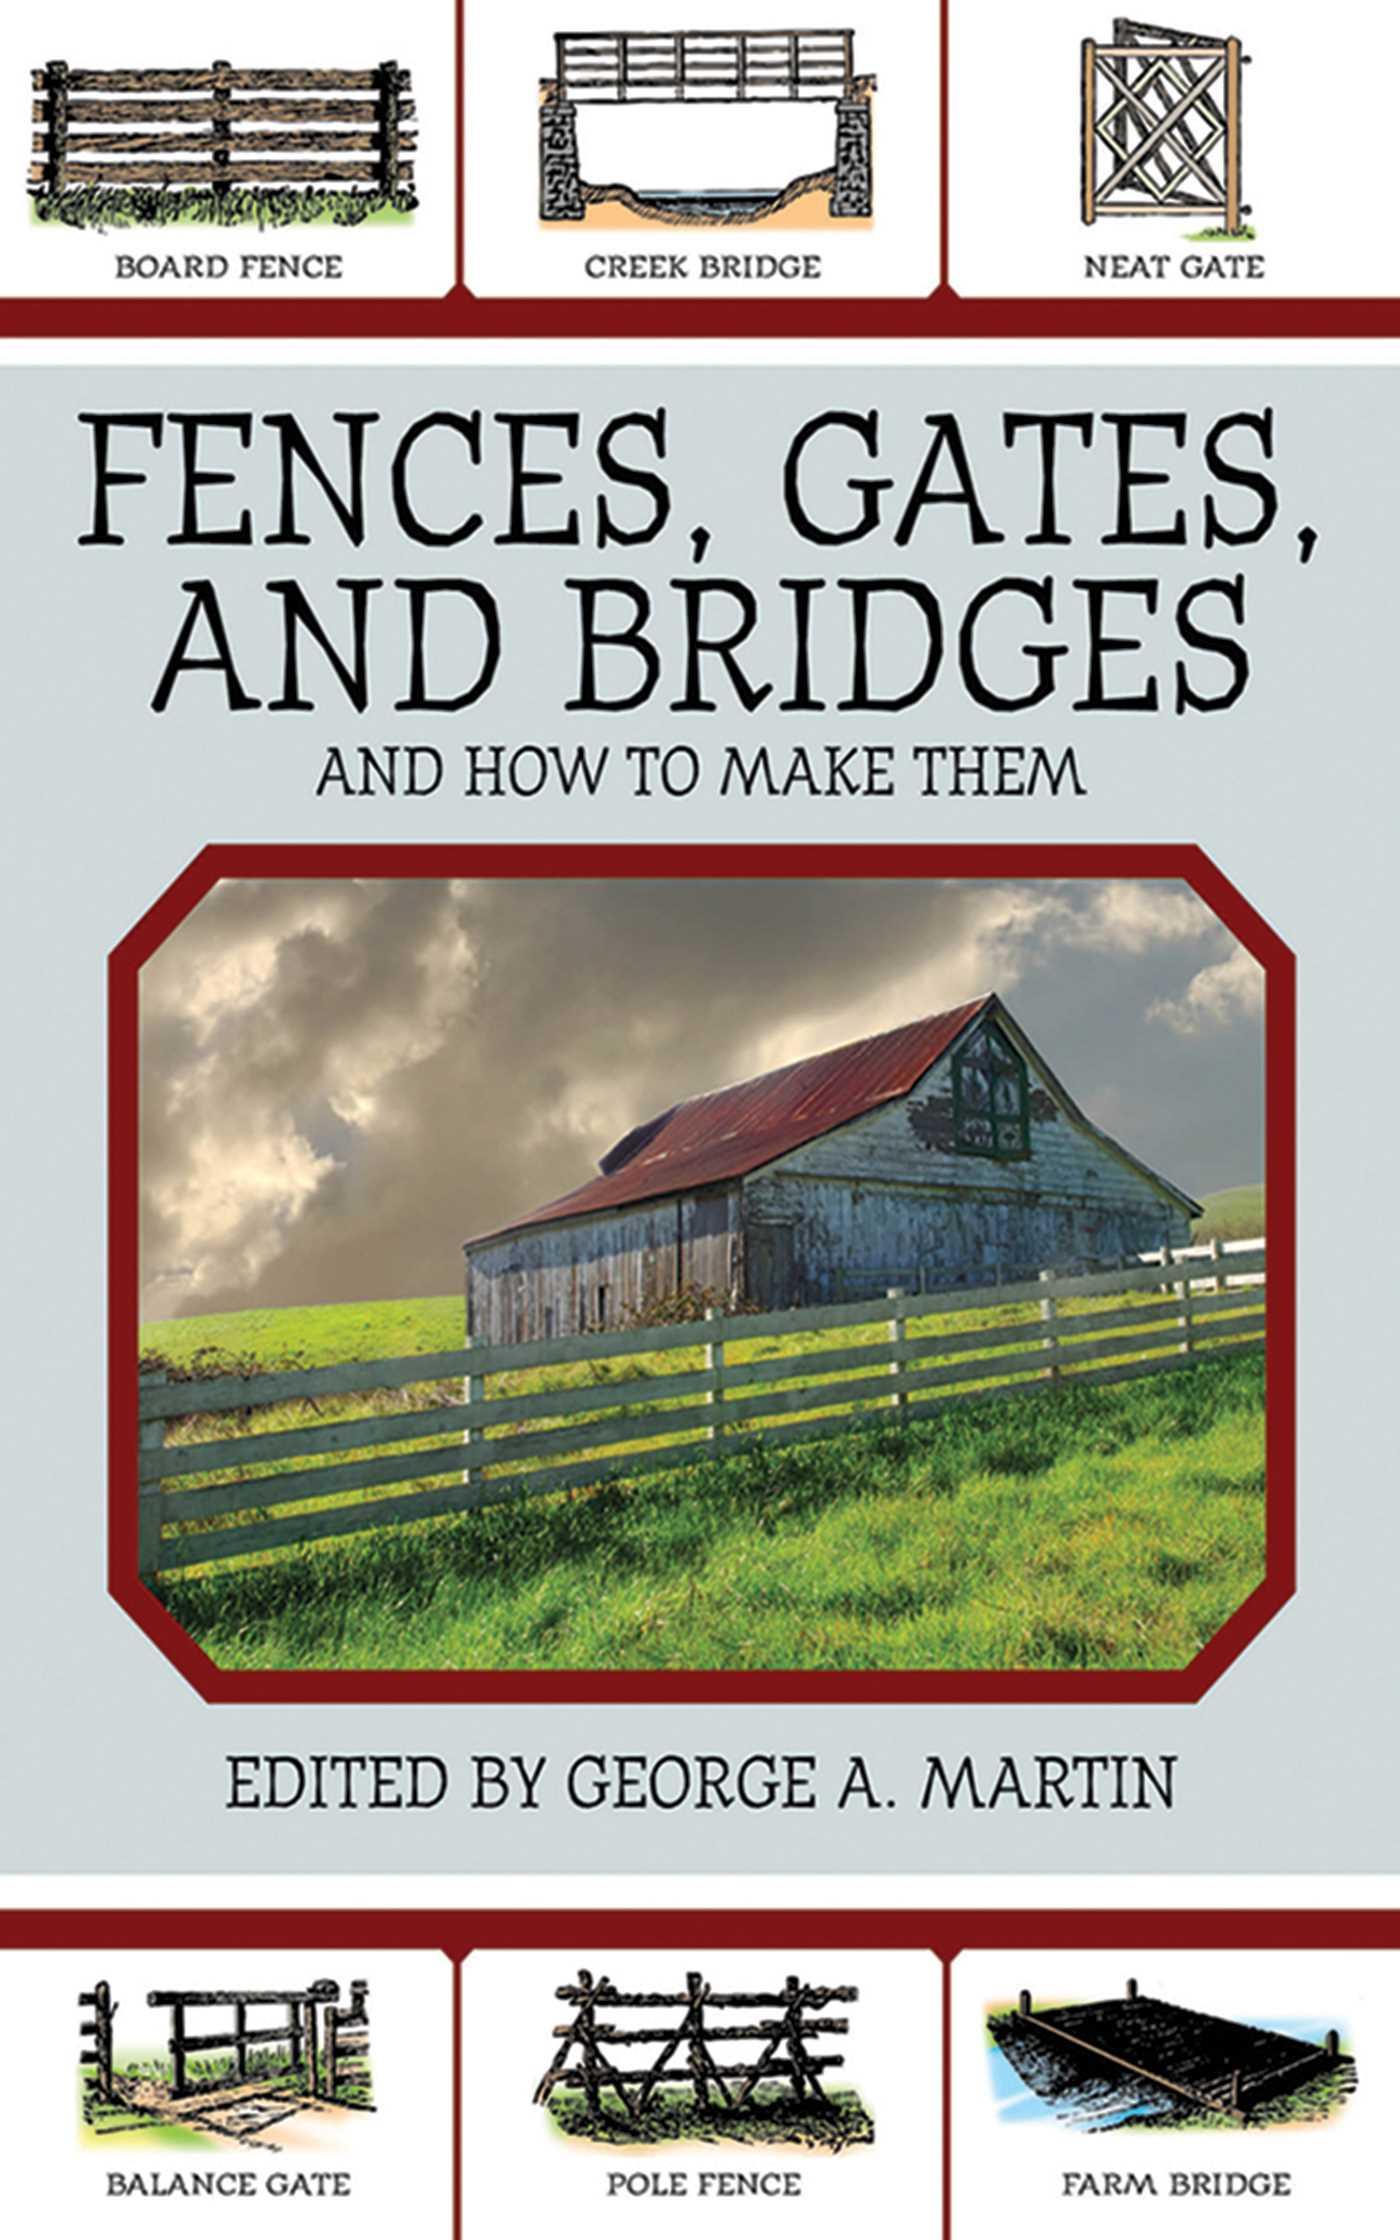 Fences, Gates, and Bridges | And How to Make Them | George A Martin | Taschenbuch | Englisch | 2011 | Skyhorse Publishing | EAN 9781616081294 - Martin, George A